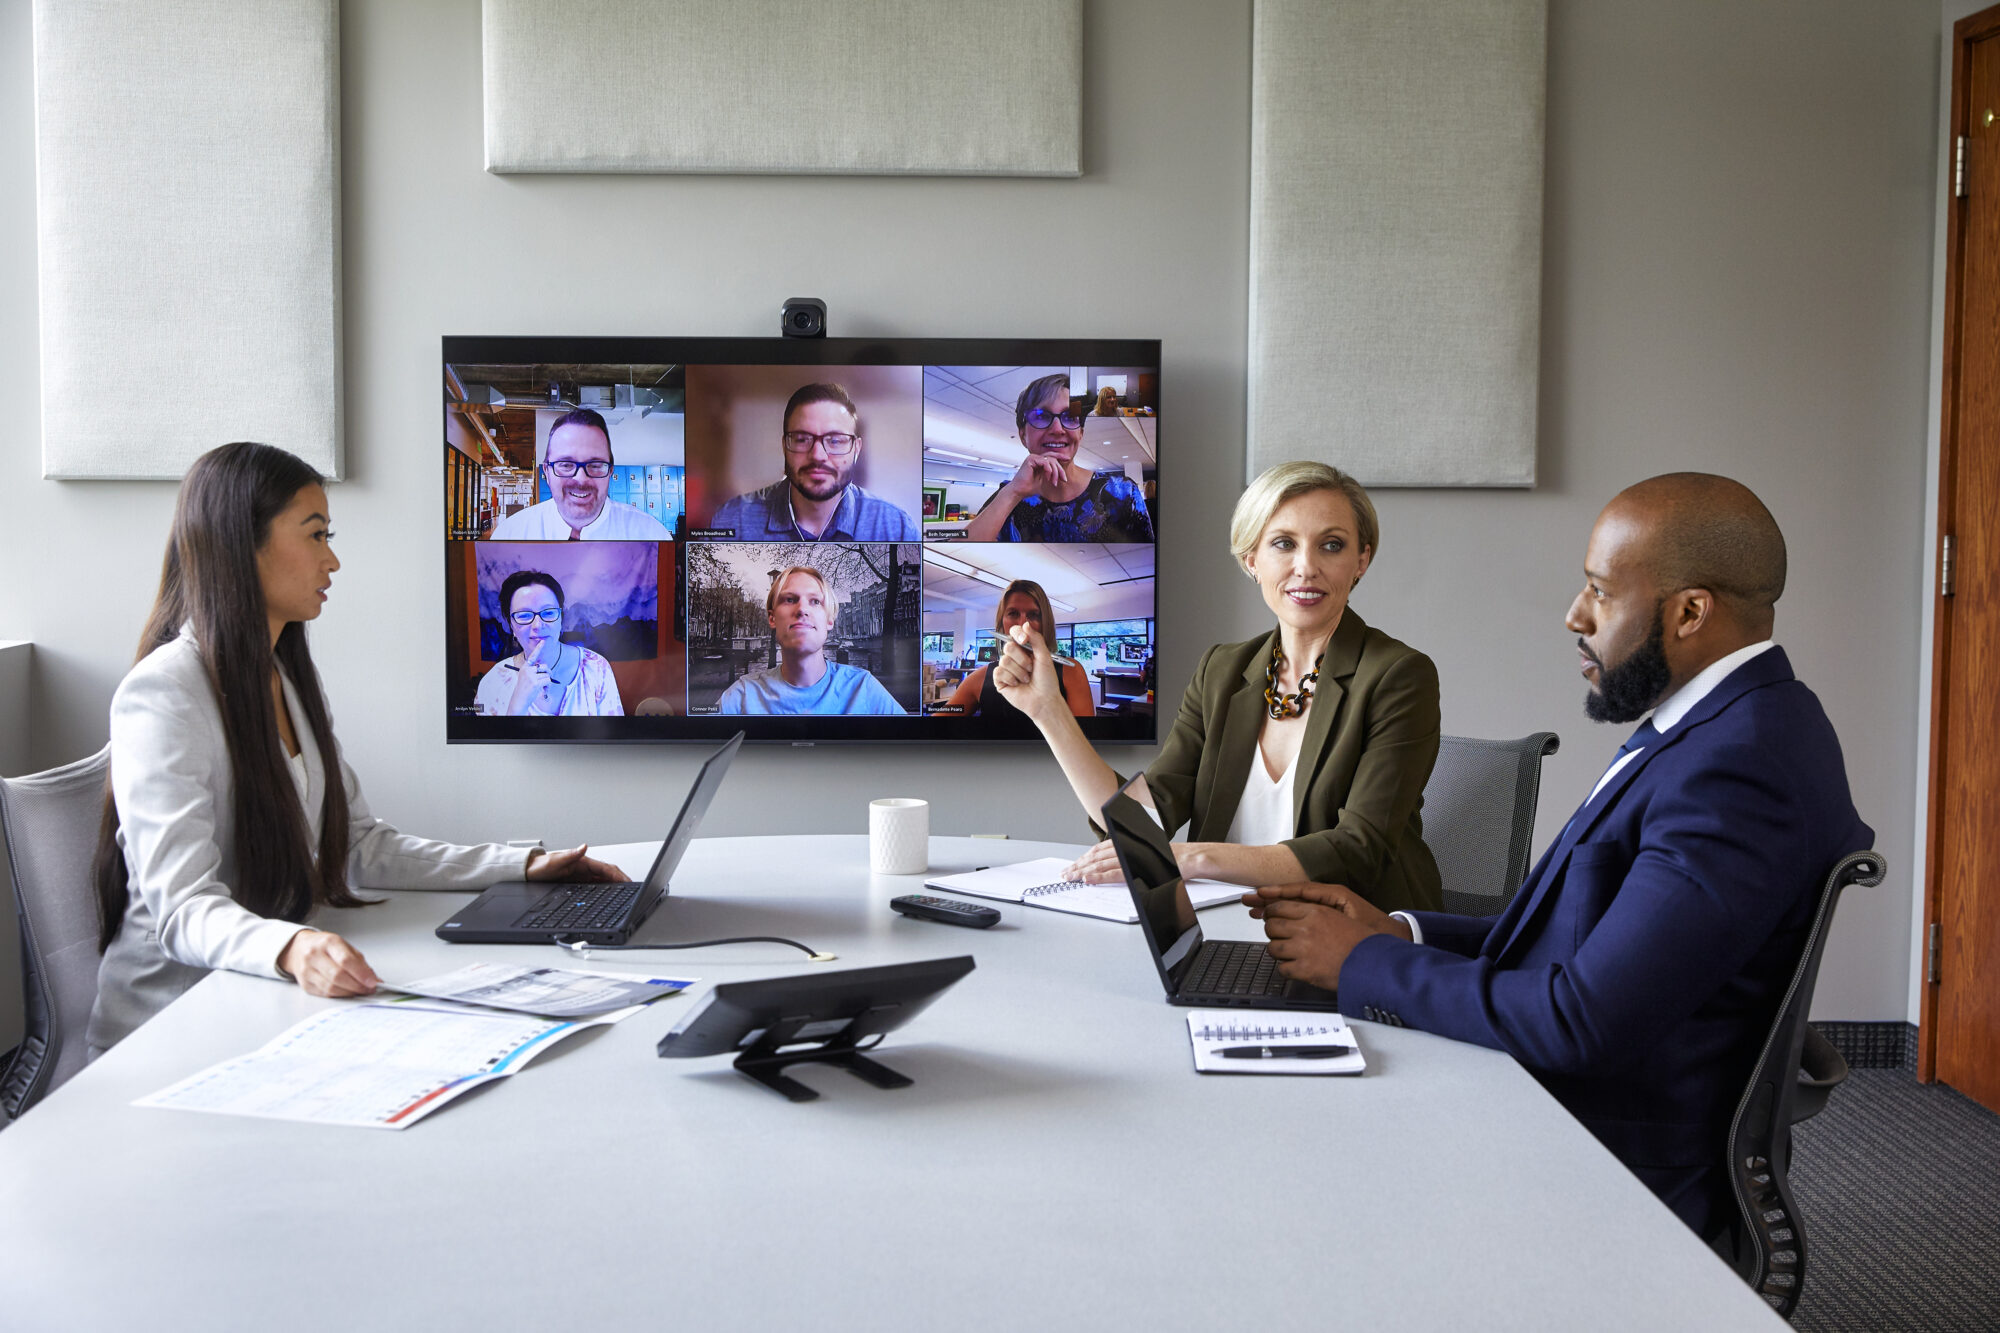 Legrand | AV a provider of enterprise connectivity, videoconferencing, display, and power will demonstrate its collaboration products in booth 108 at Enterprise Connect 2023.